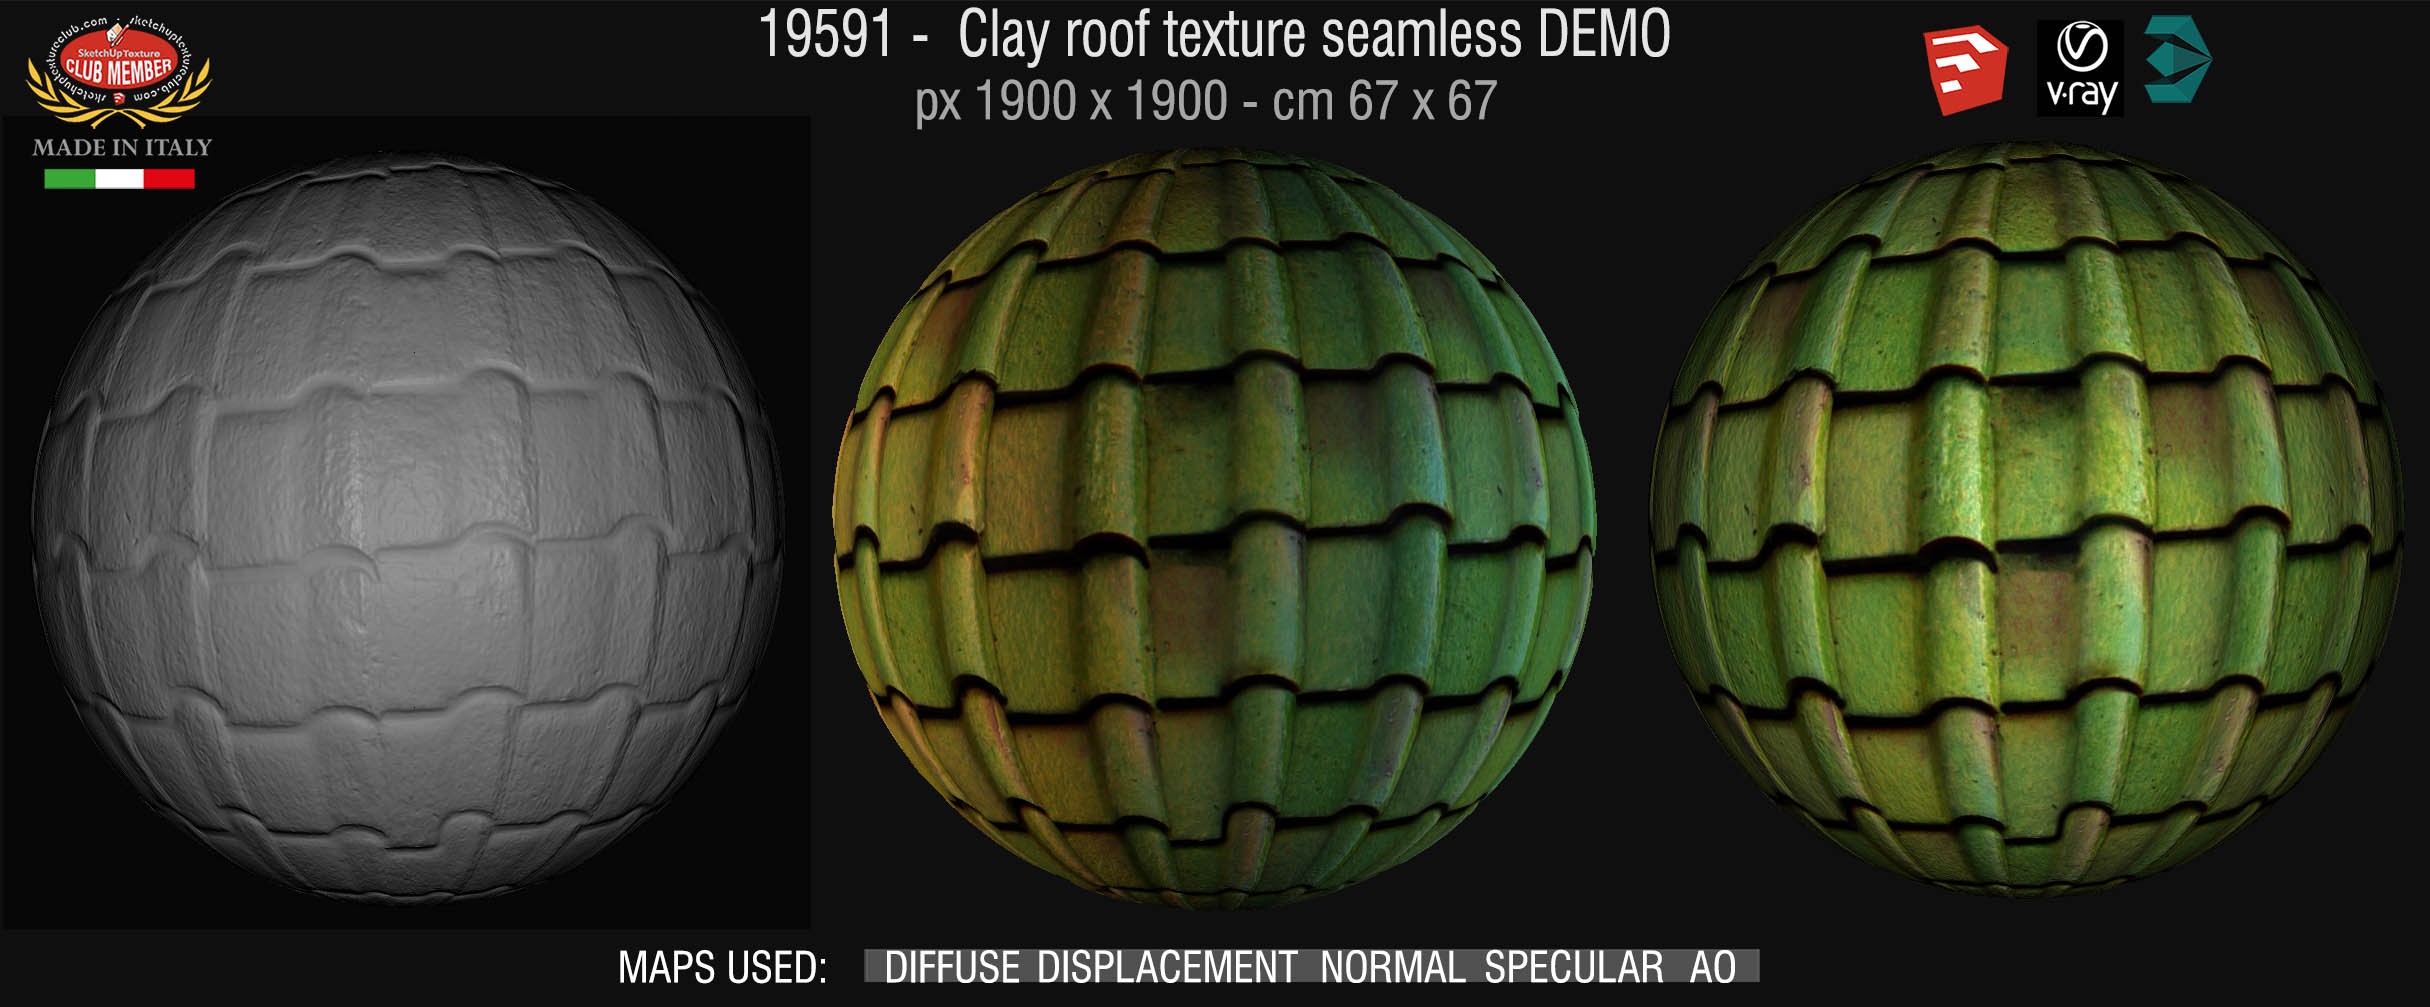 19591 Clay roof texture seamless + maps DEMO